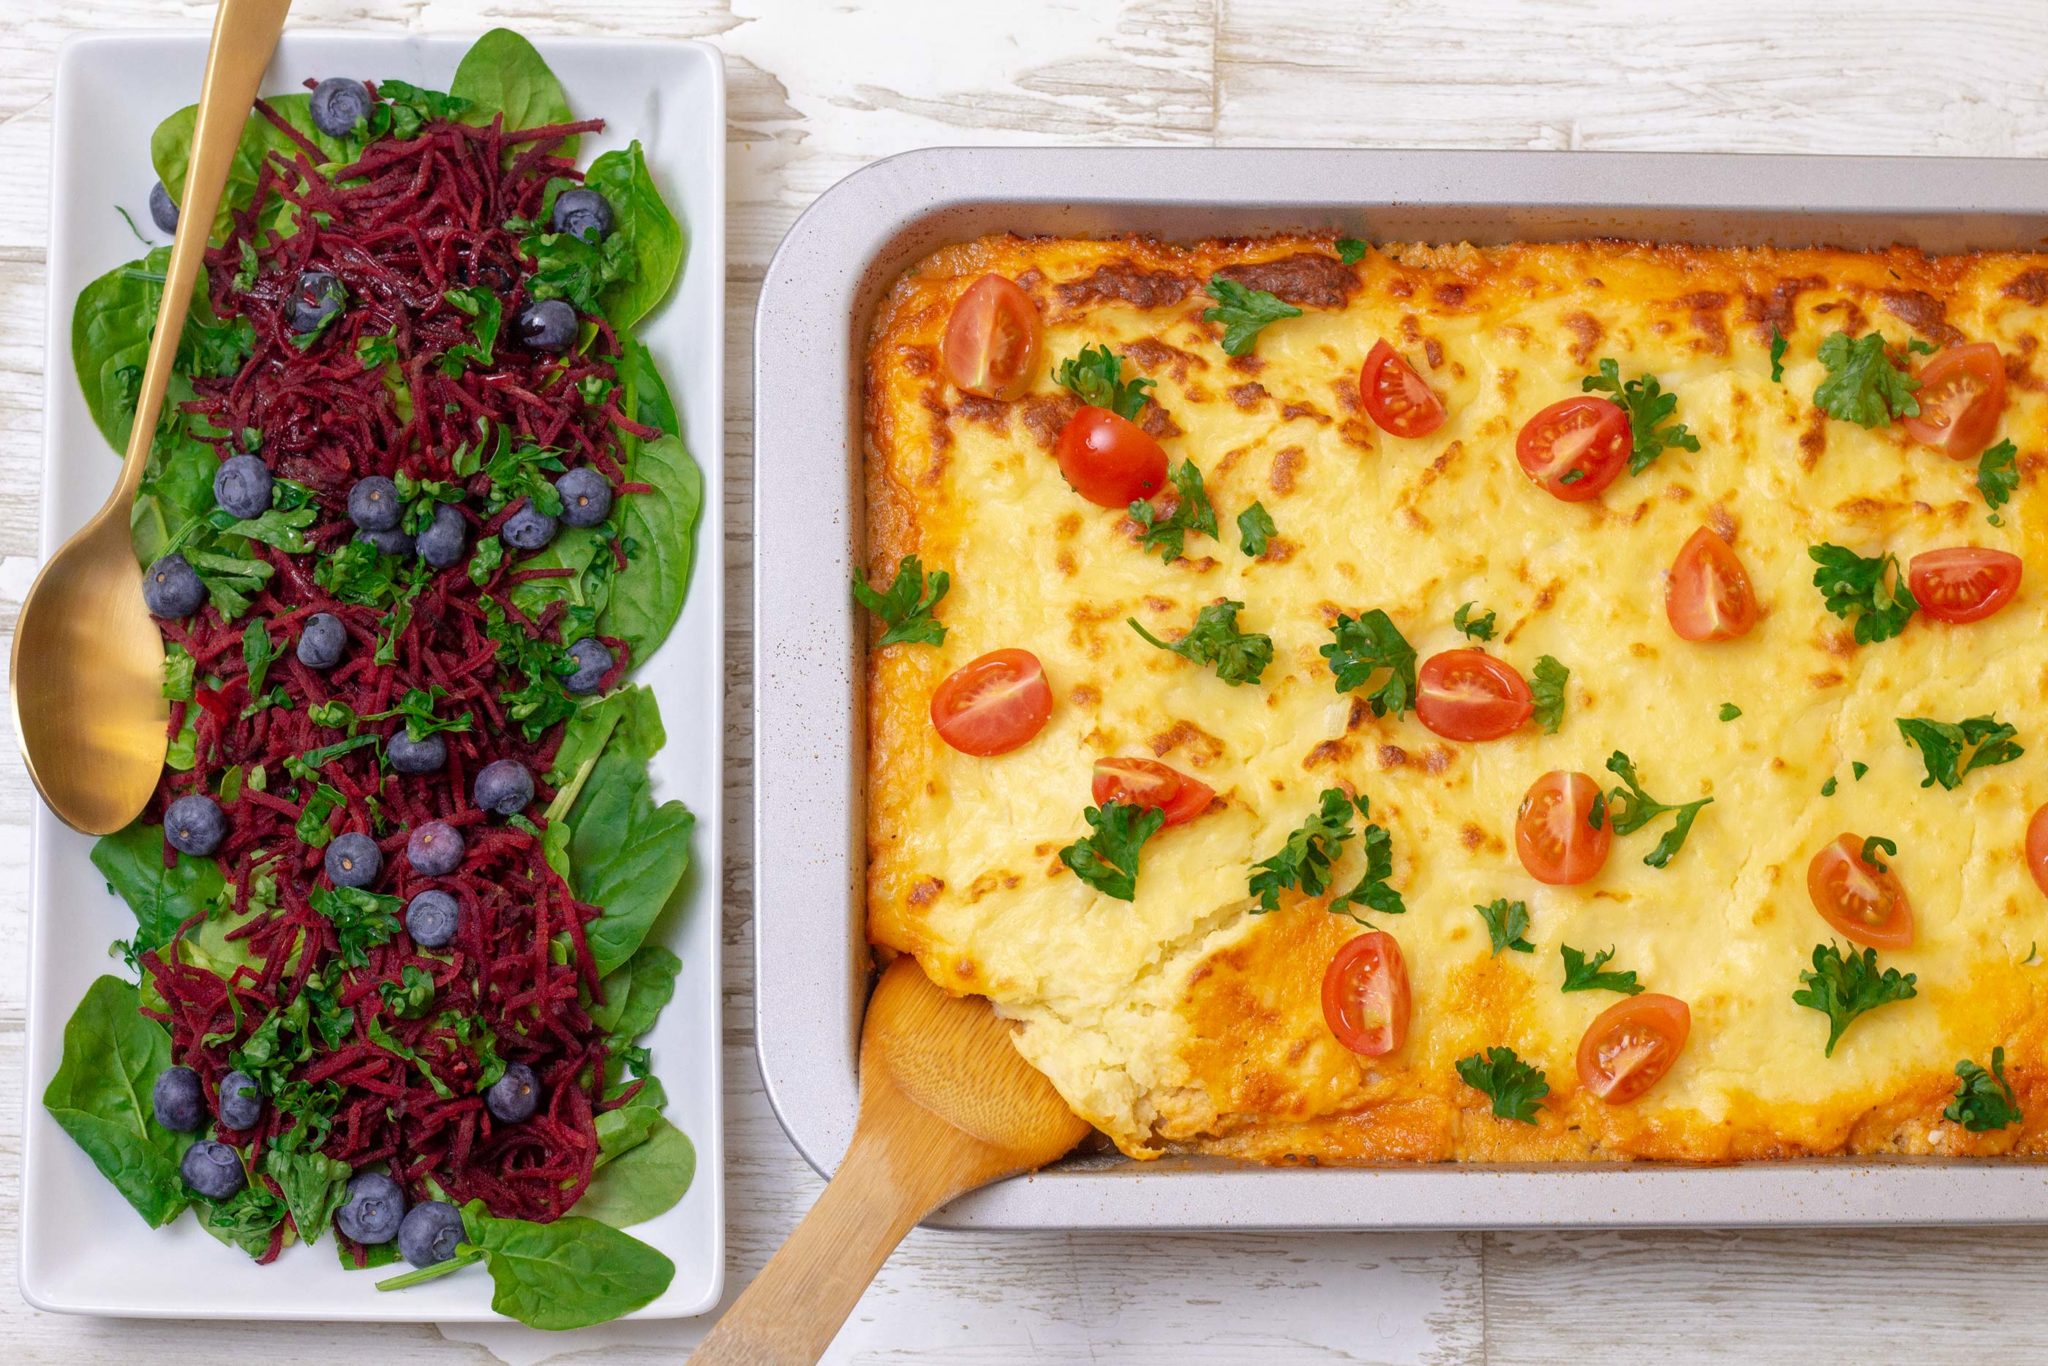 Mashed potato gratin with chicken bolognese and salad - for two days